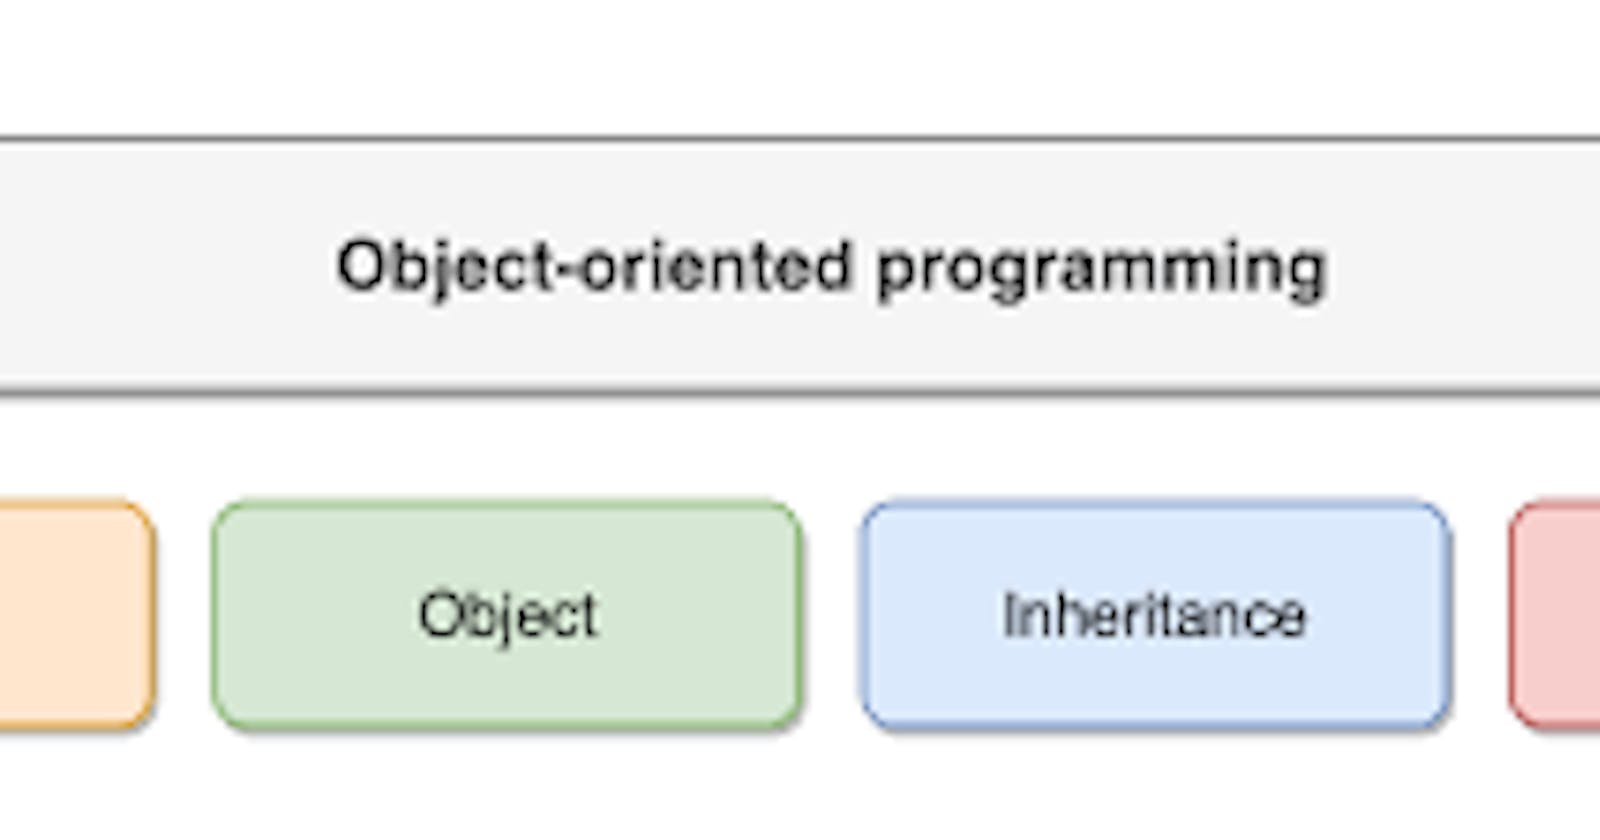 Interfaces in object oriented programming languages and prototype-based languages